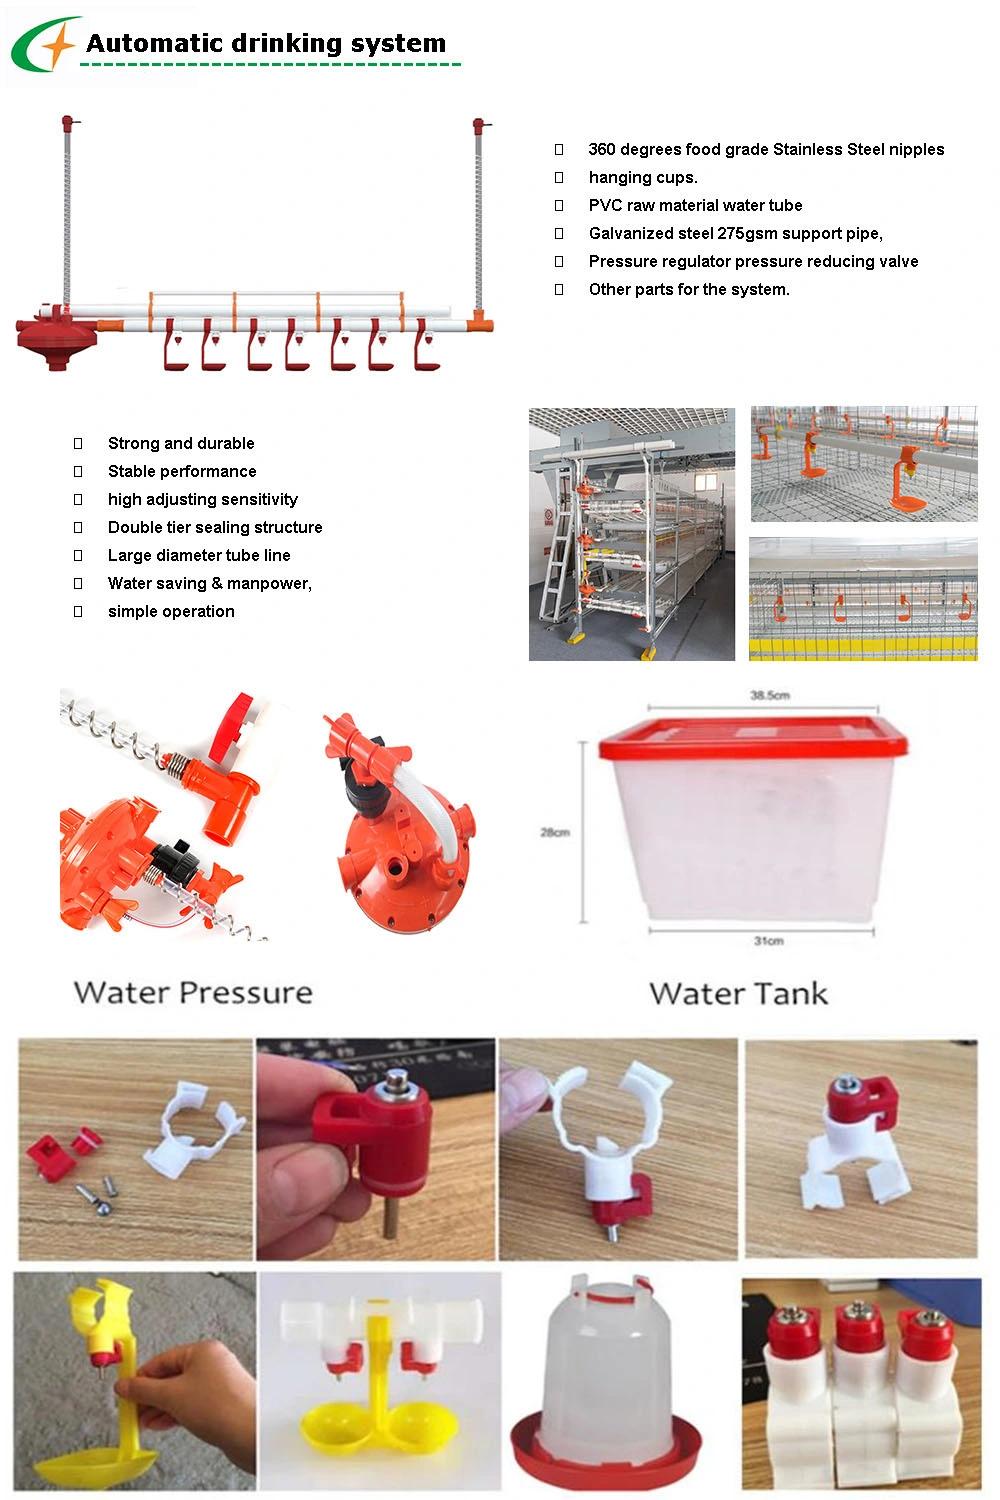 Boiler Chicken Open House Battery Cage System for Wholesales